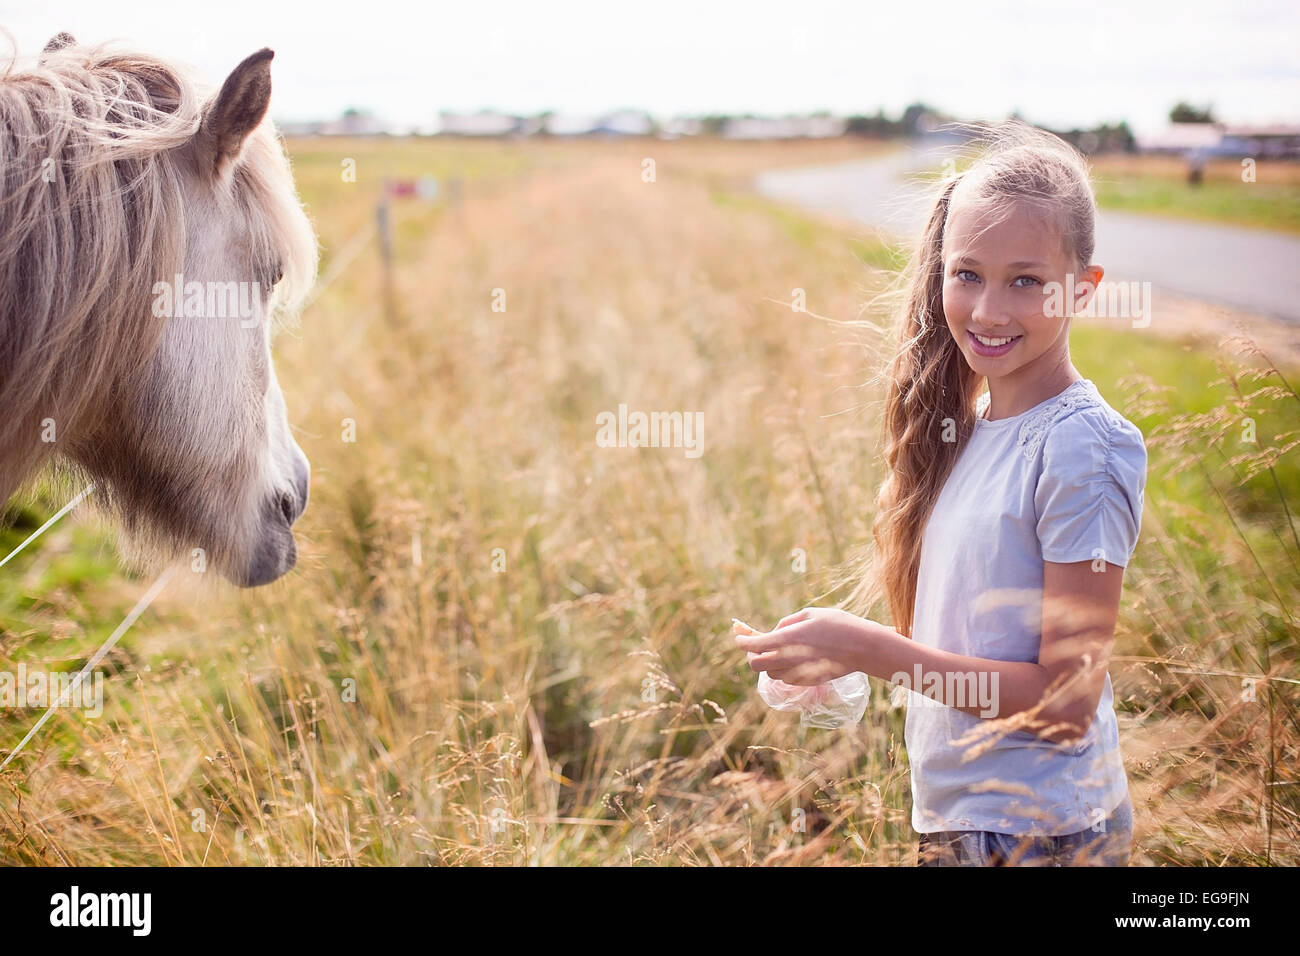 Iceland, Girl (10-11) with horse in field Stock Photo